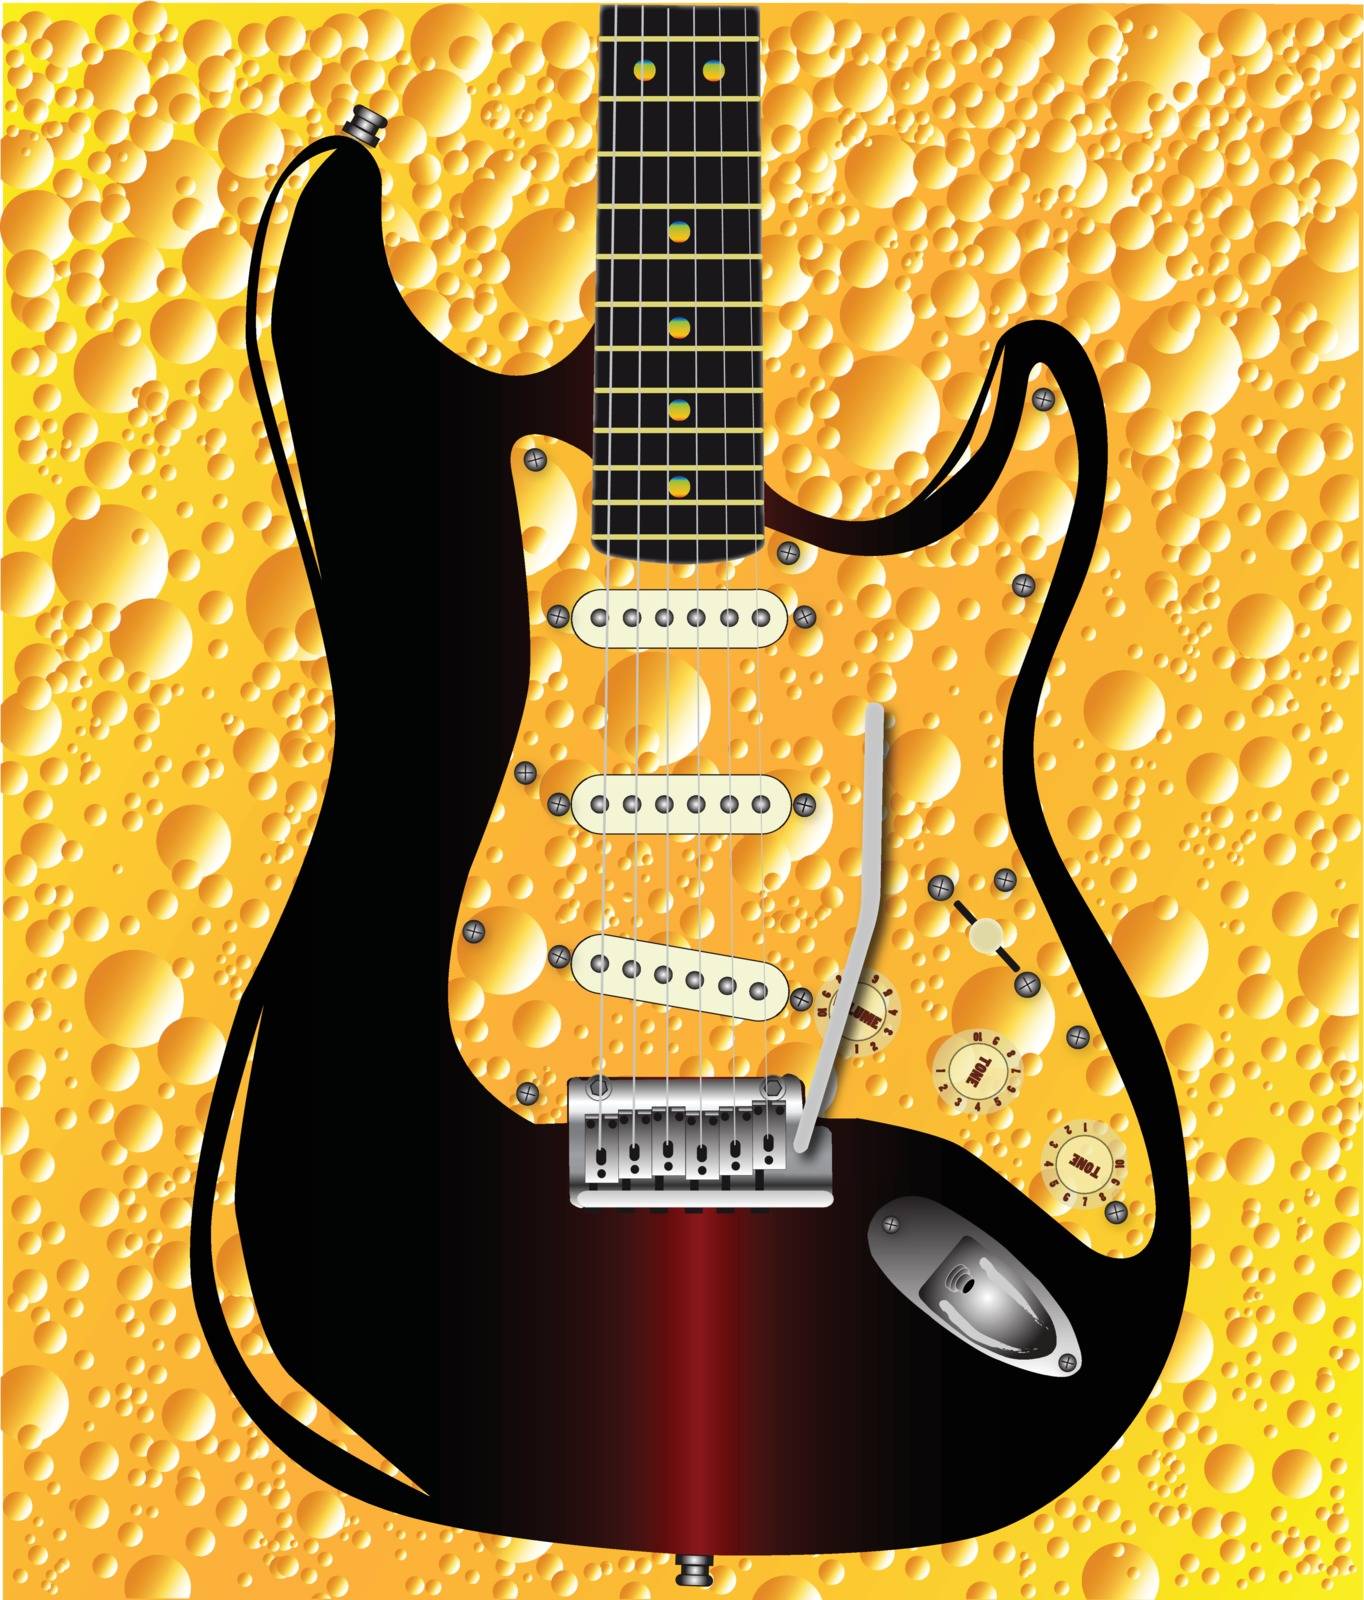 A cola bubble background patern with a rock guitar superimposed.